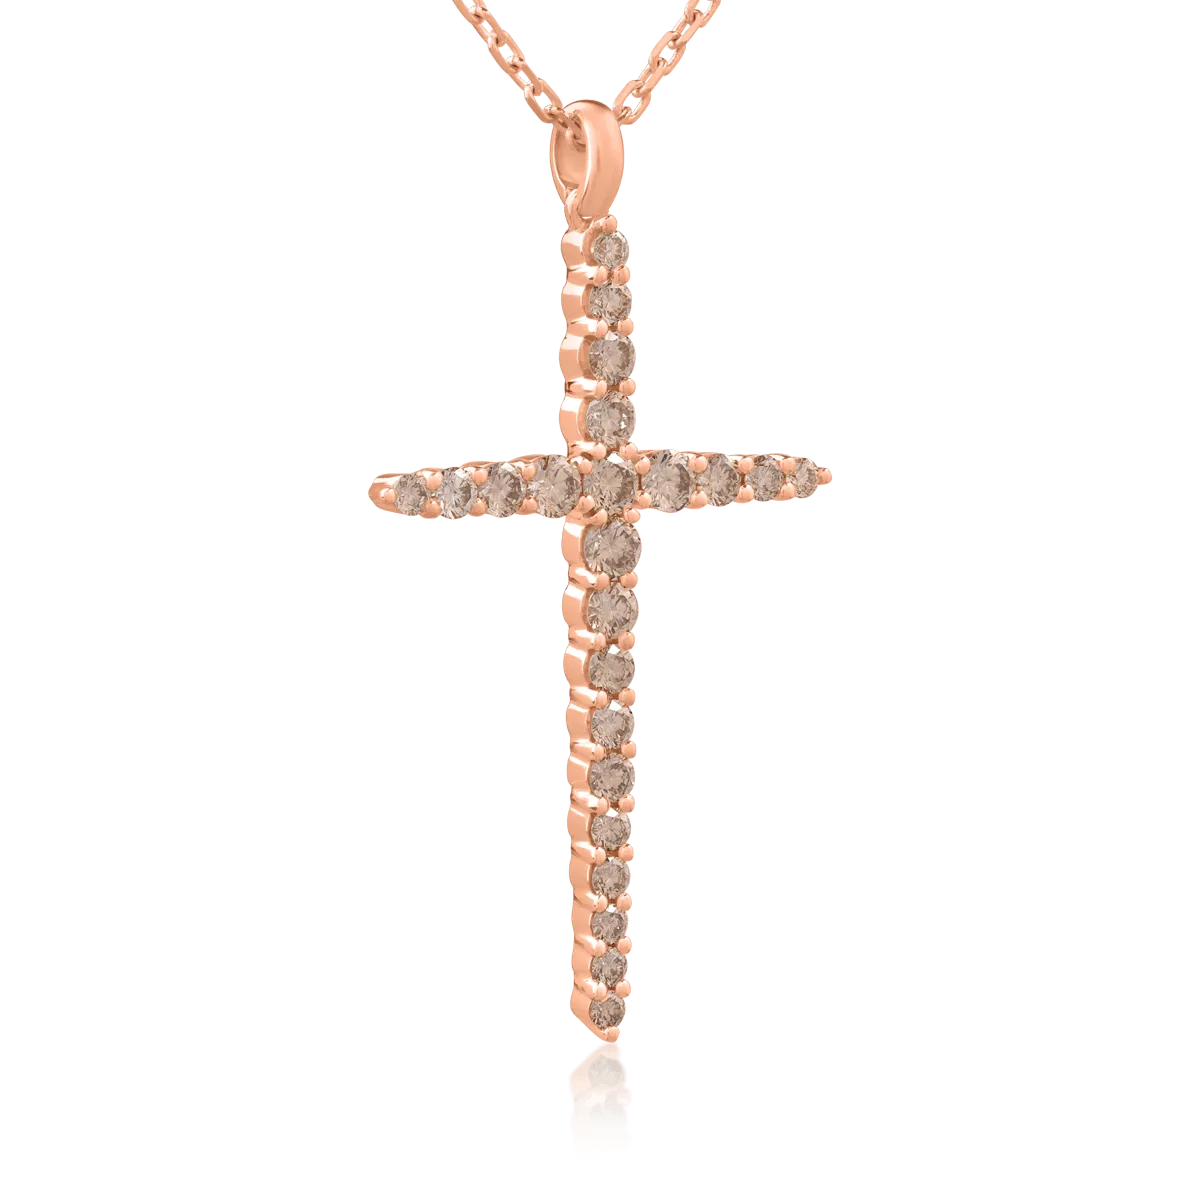 18K rose gold cross pendant necklace with 1ct brown diamonds